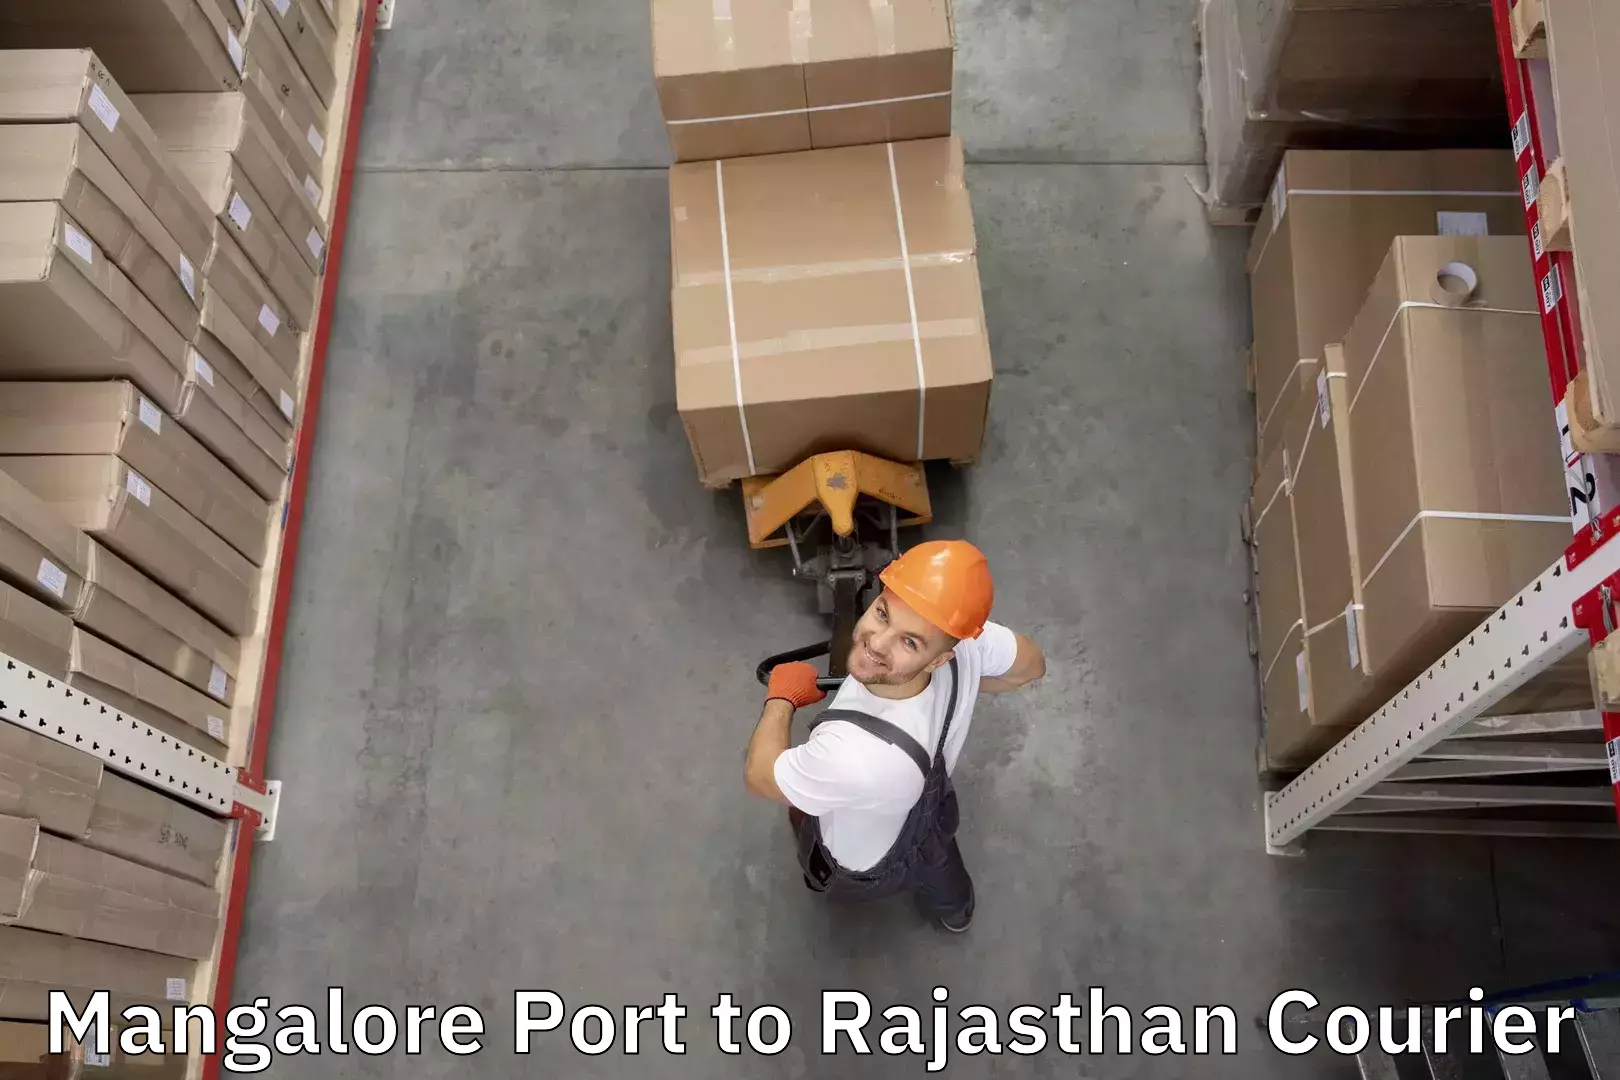 Baggage transport network Mangalore Port to Abu Road